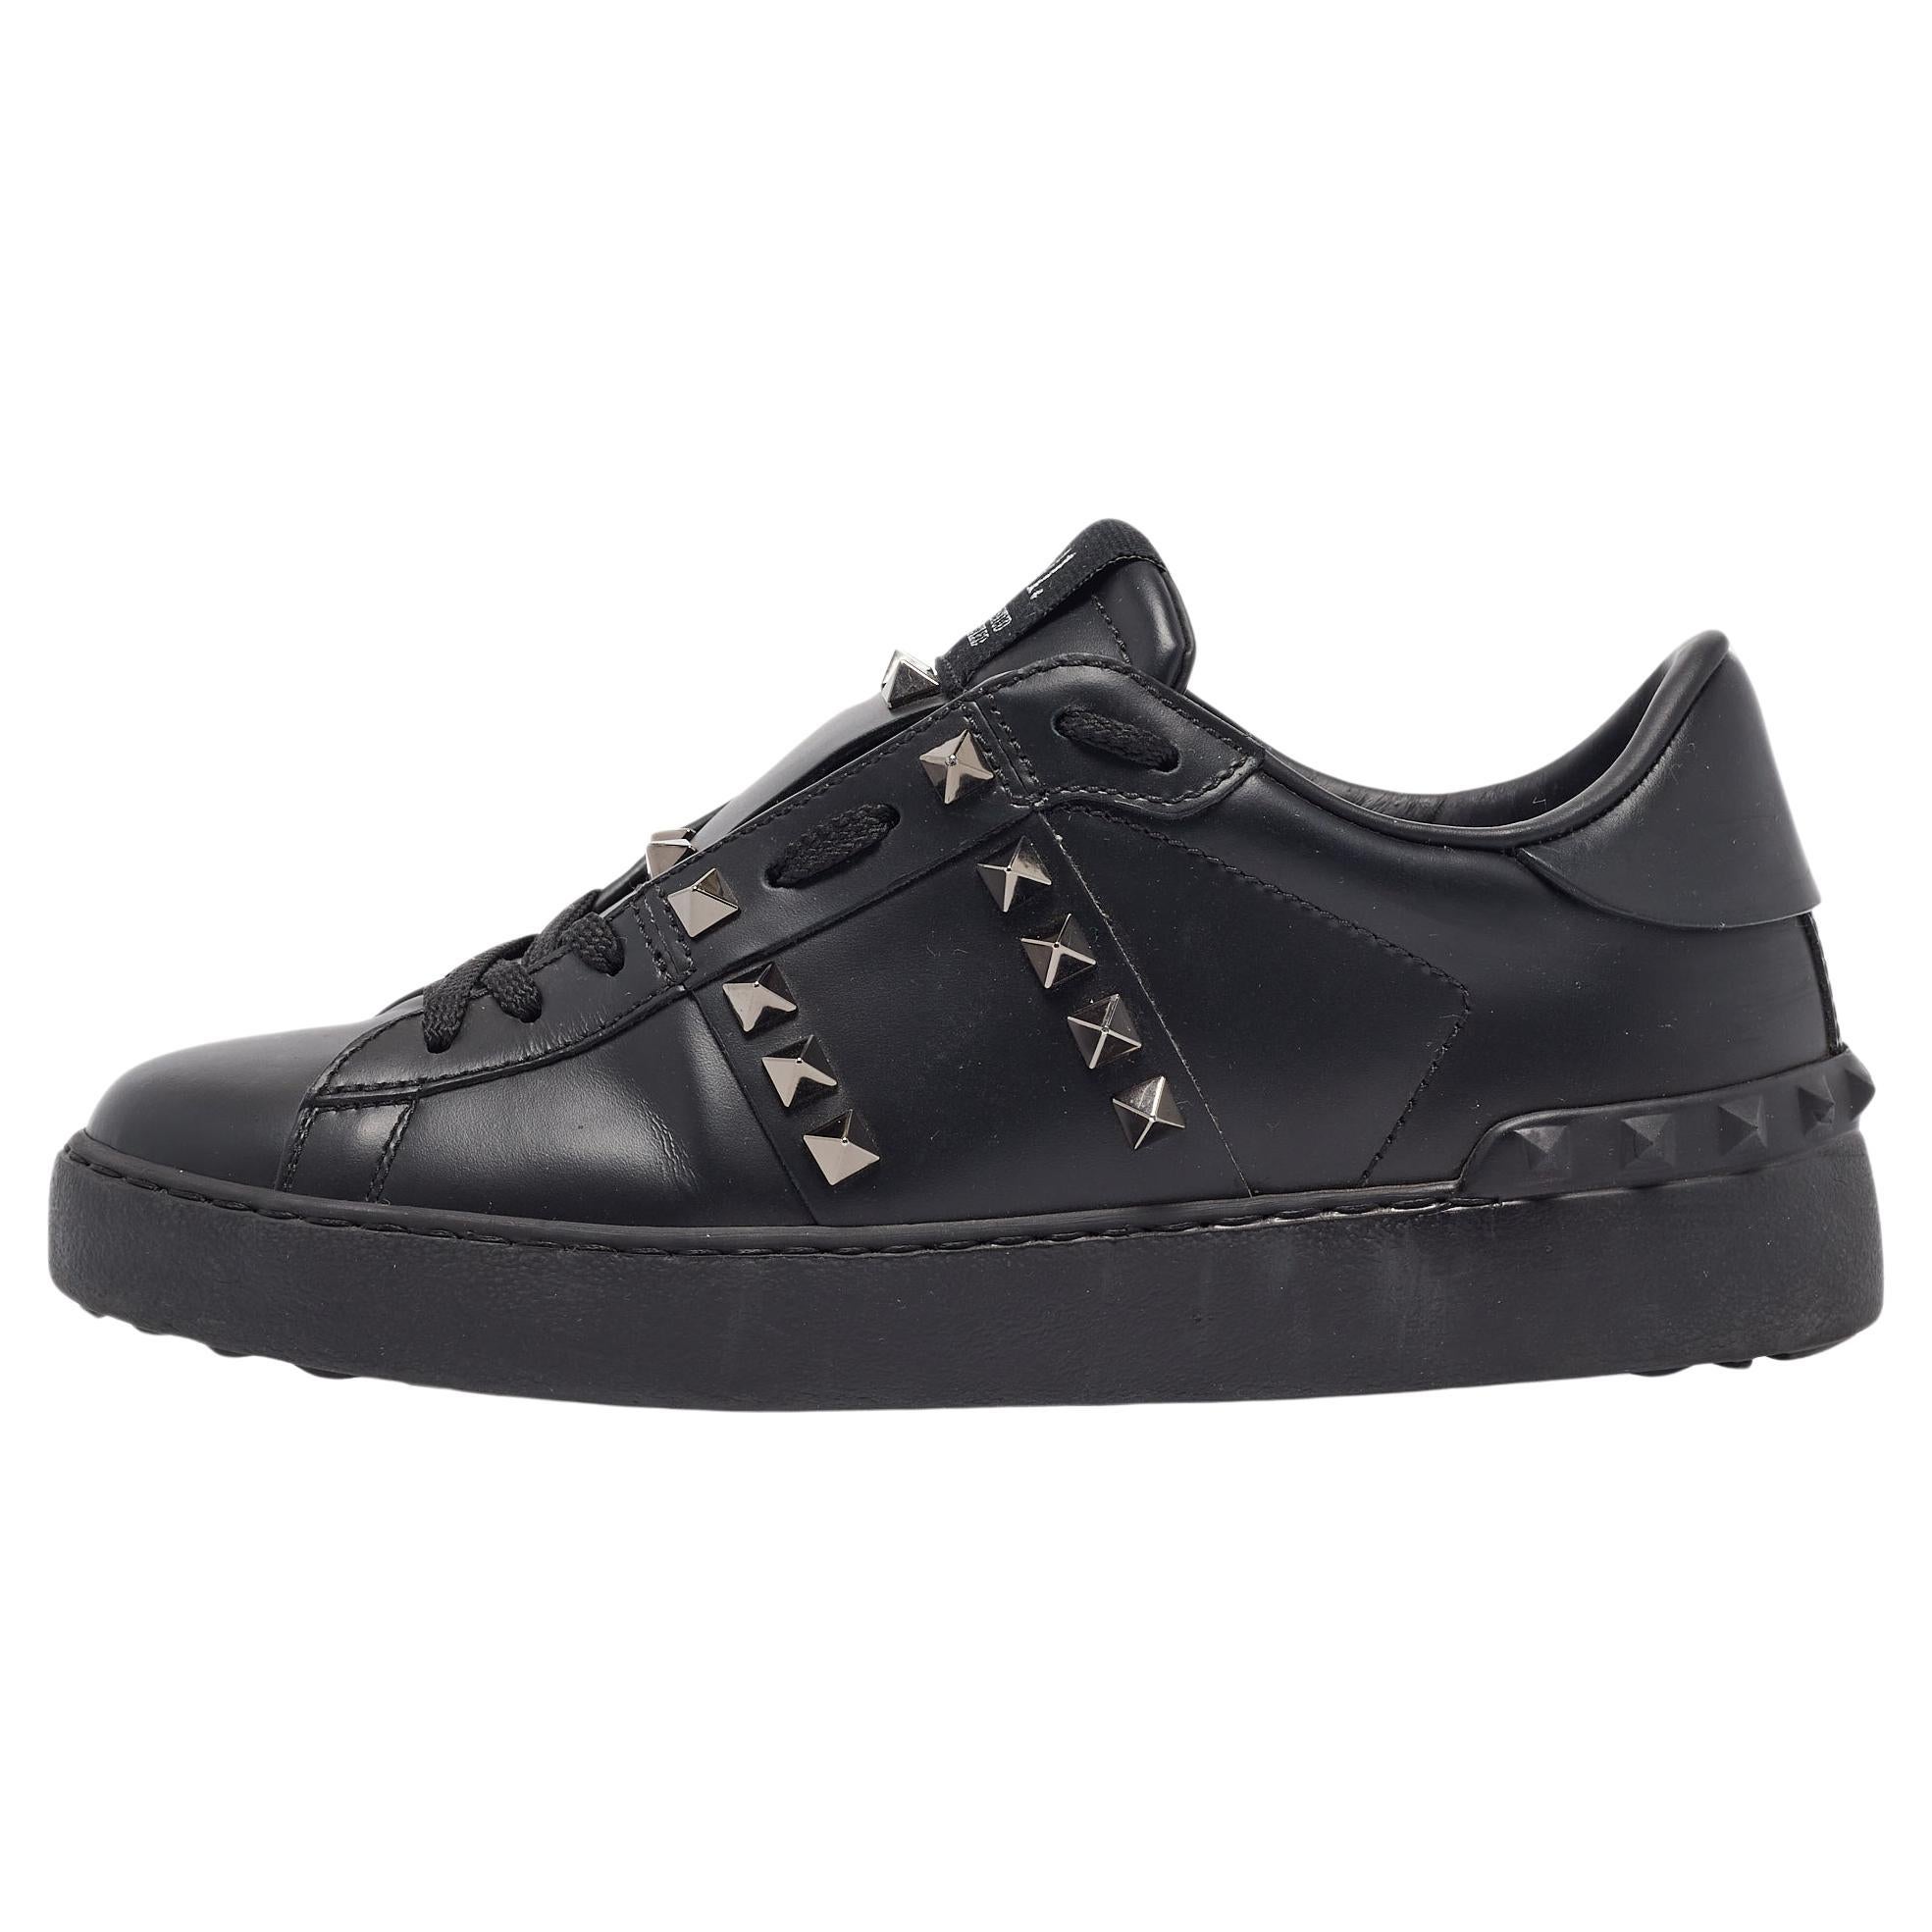 Valentino Black Leather Rockstud Low Top Sneakers Size 36.5